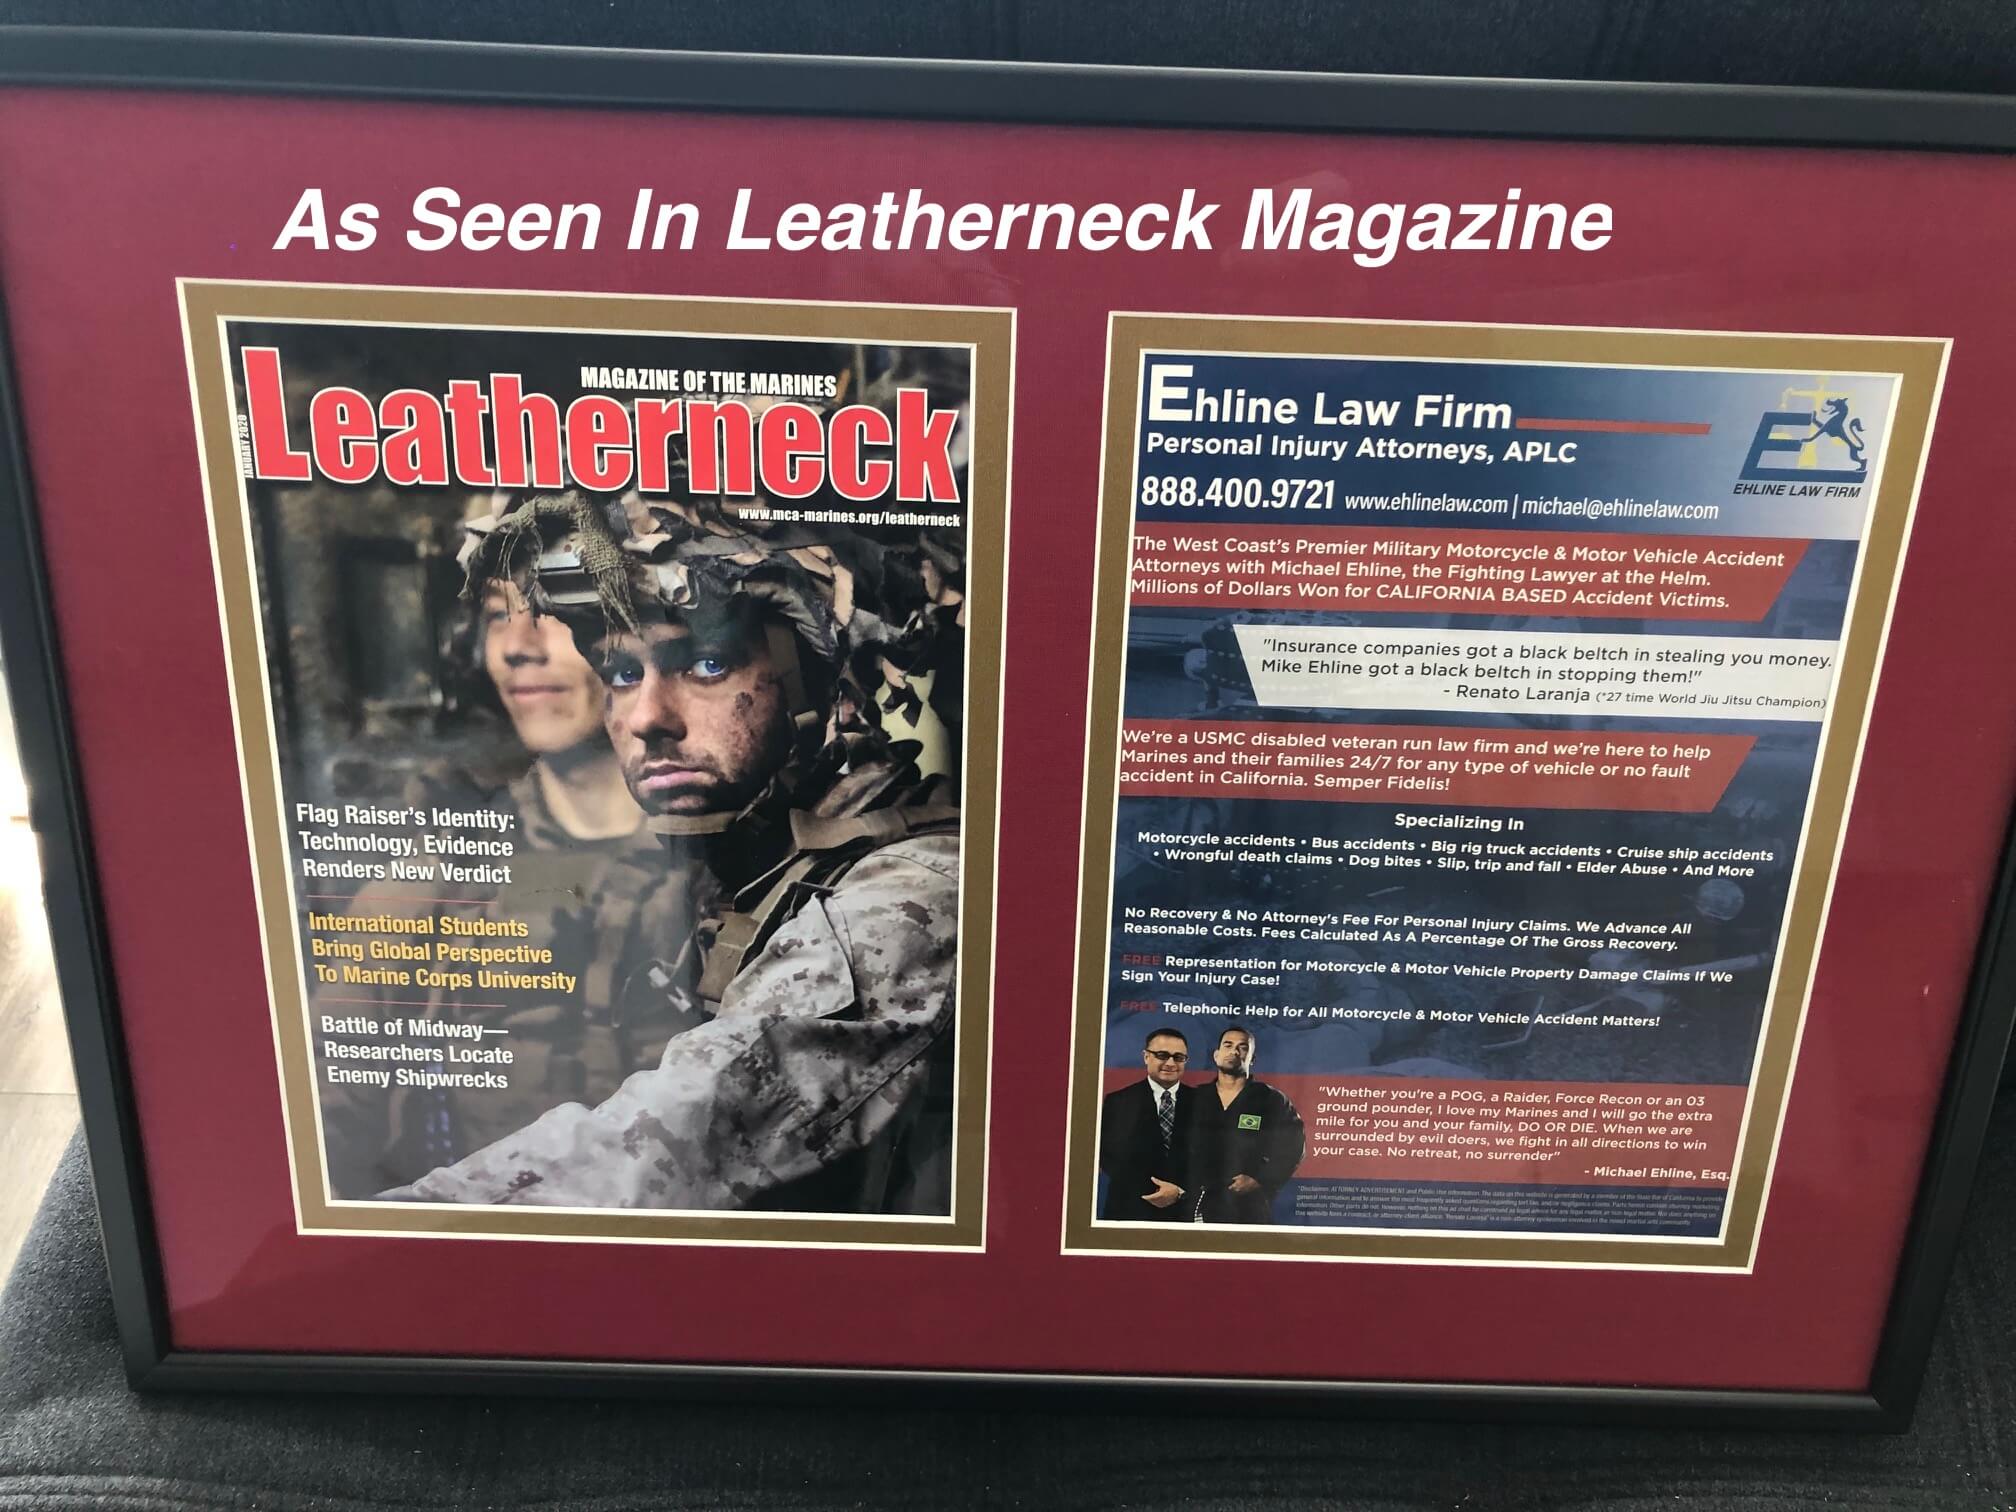 Ehline Law Firm featured in Leatherneck Magazine - The Magazine of the Marines